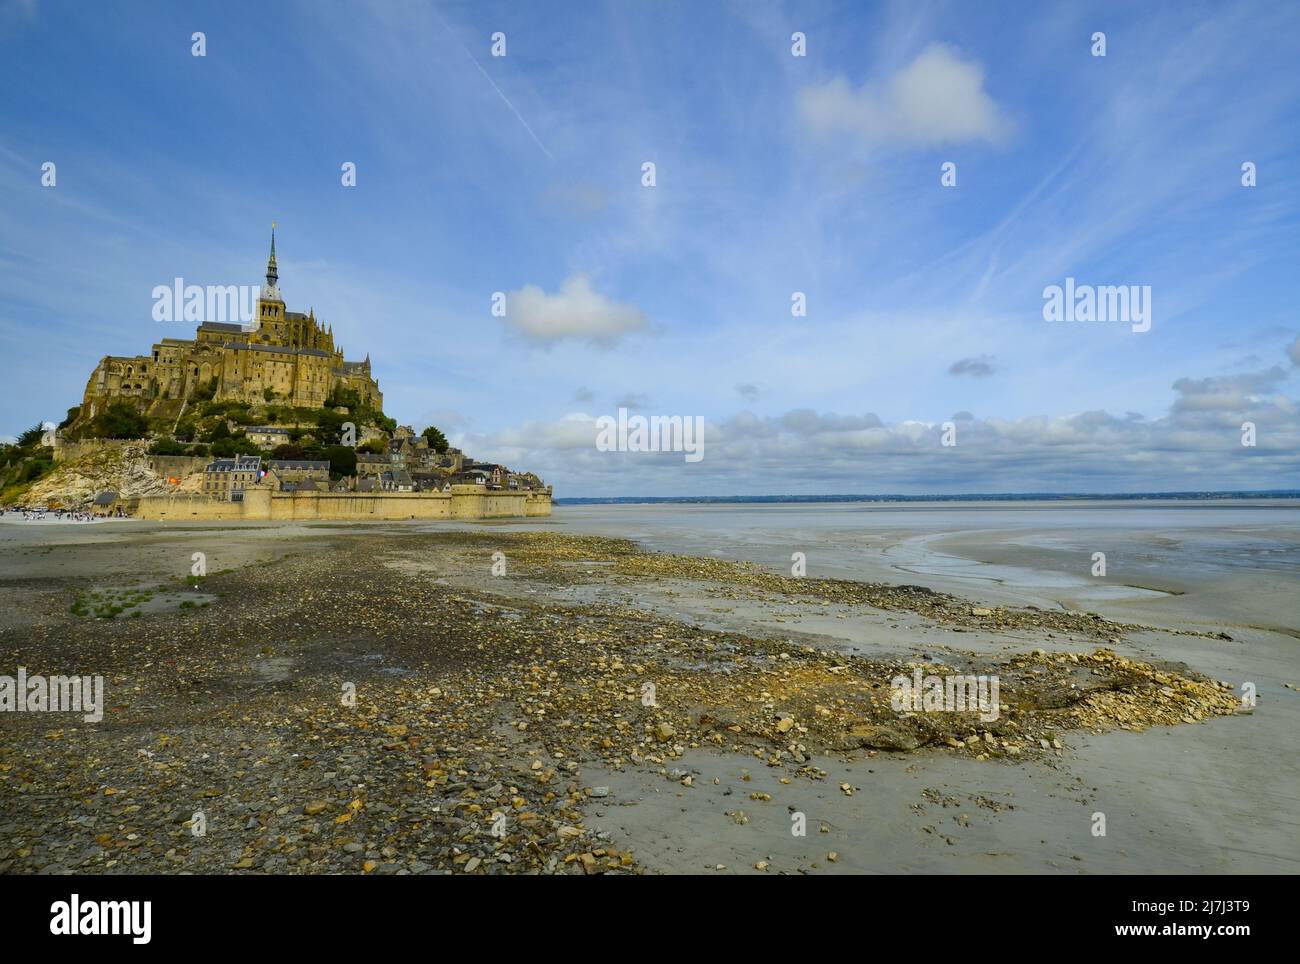 Mont-Saint-Michel in France, with historical buildings, walls, and a Church built on a tidal island. Layed buildings rise up 262 feet to Abby. Stock Photo